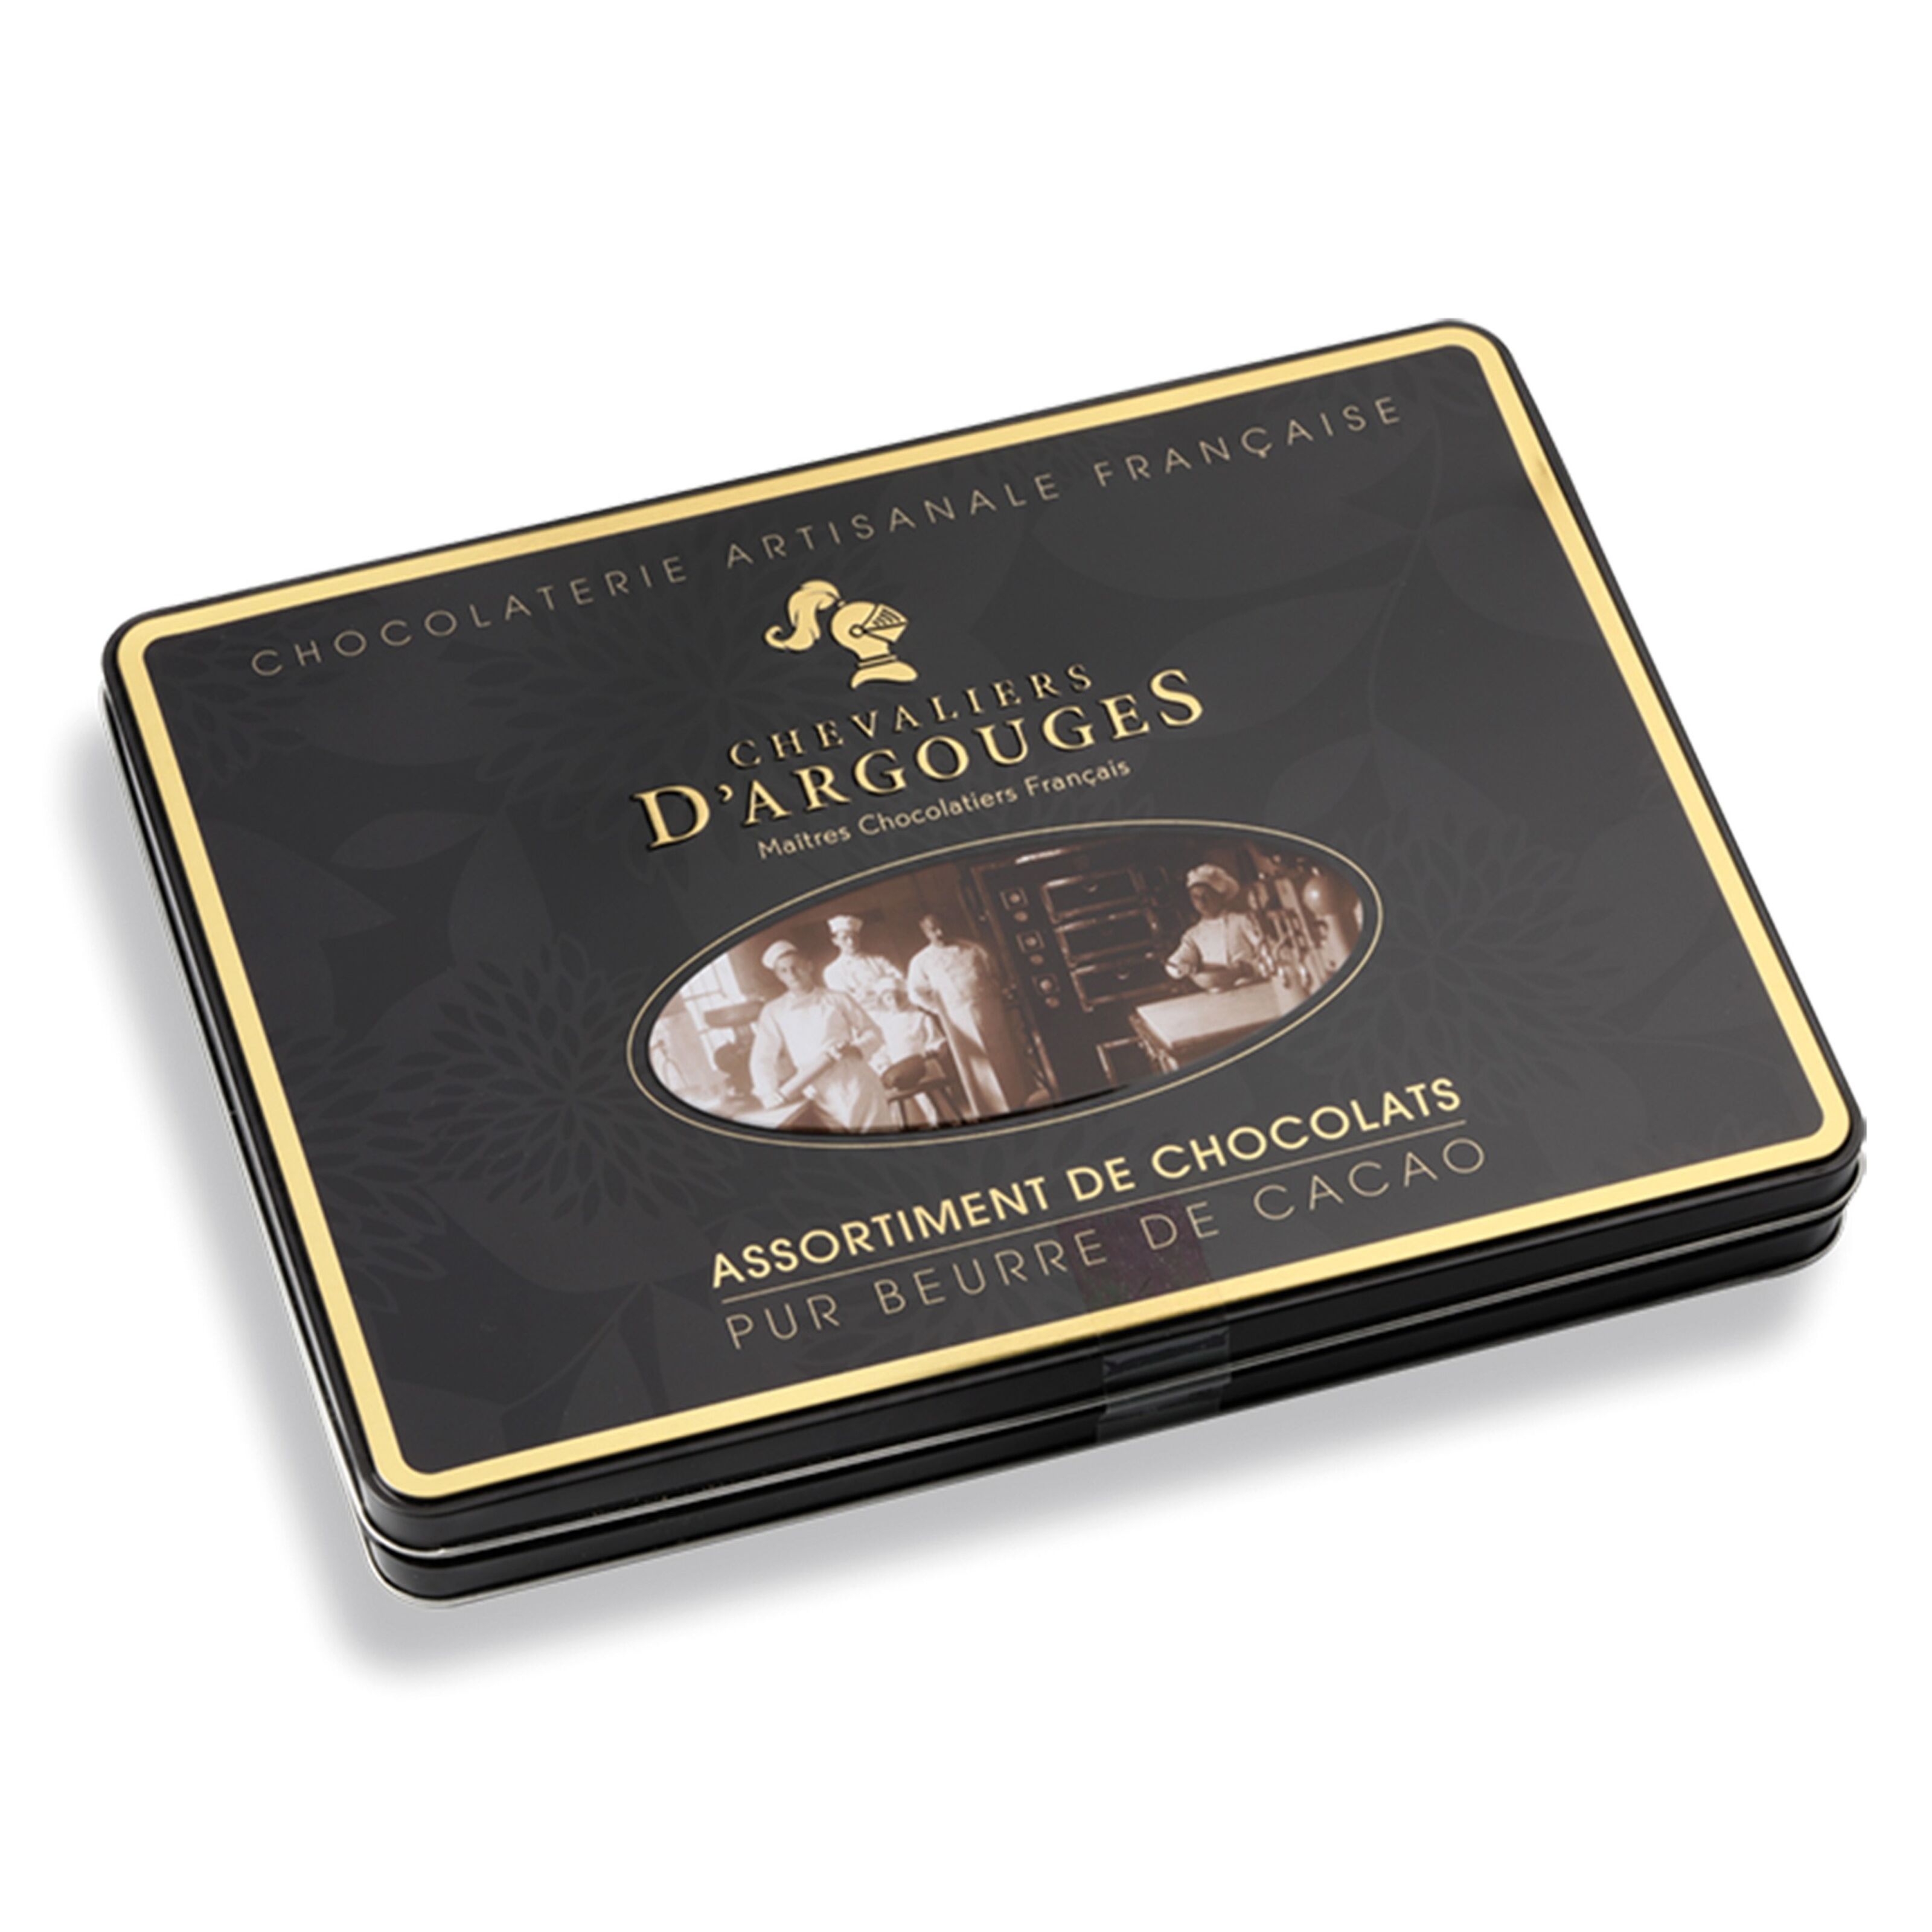 Organic Chocolate Bonbons From Chevaliers D'argouges